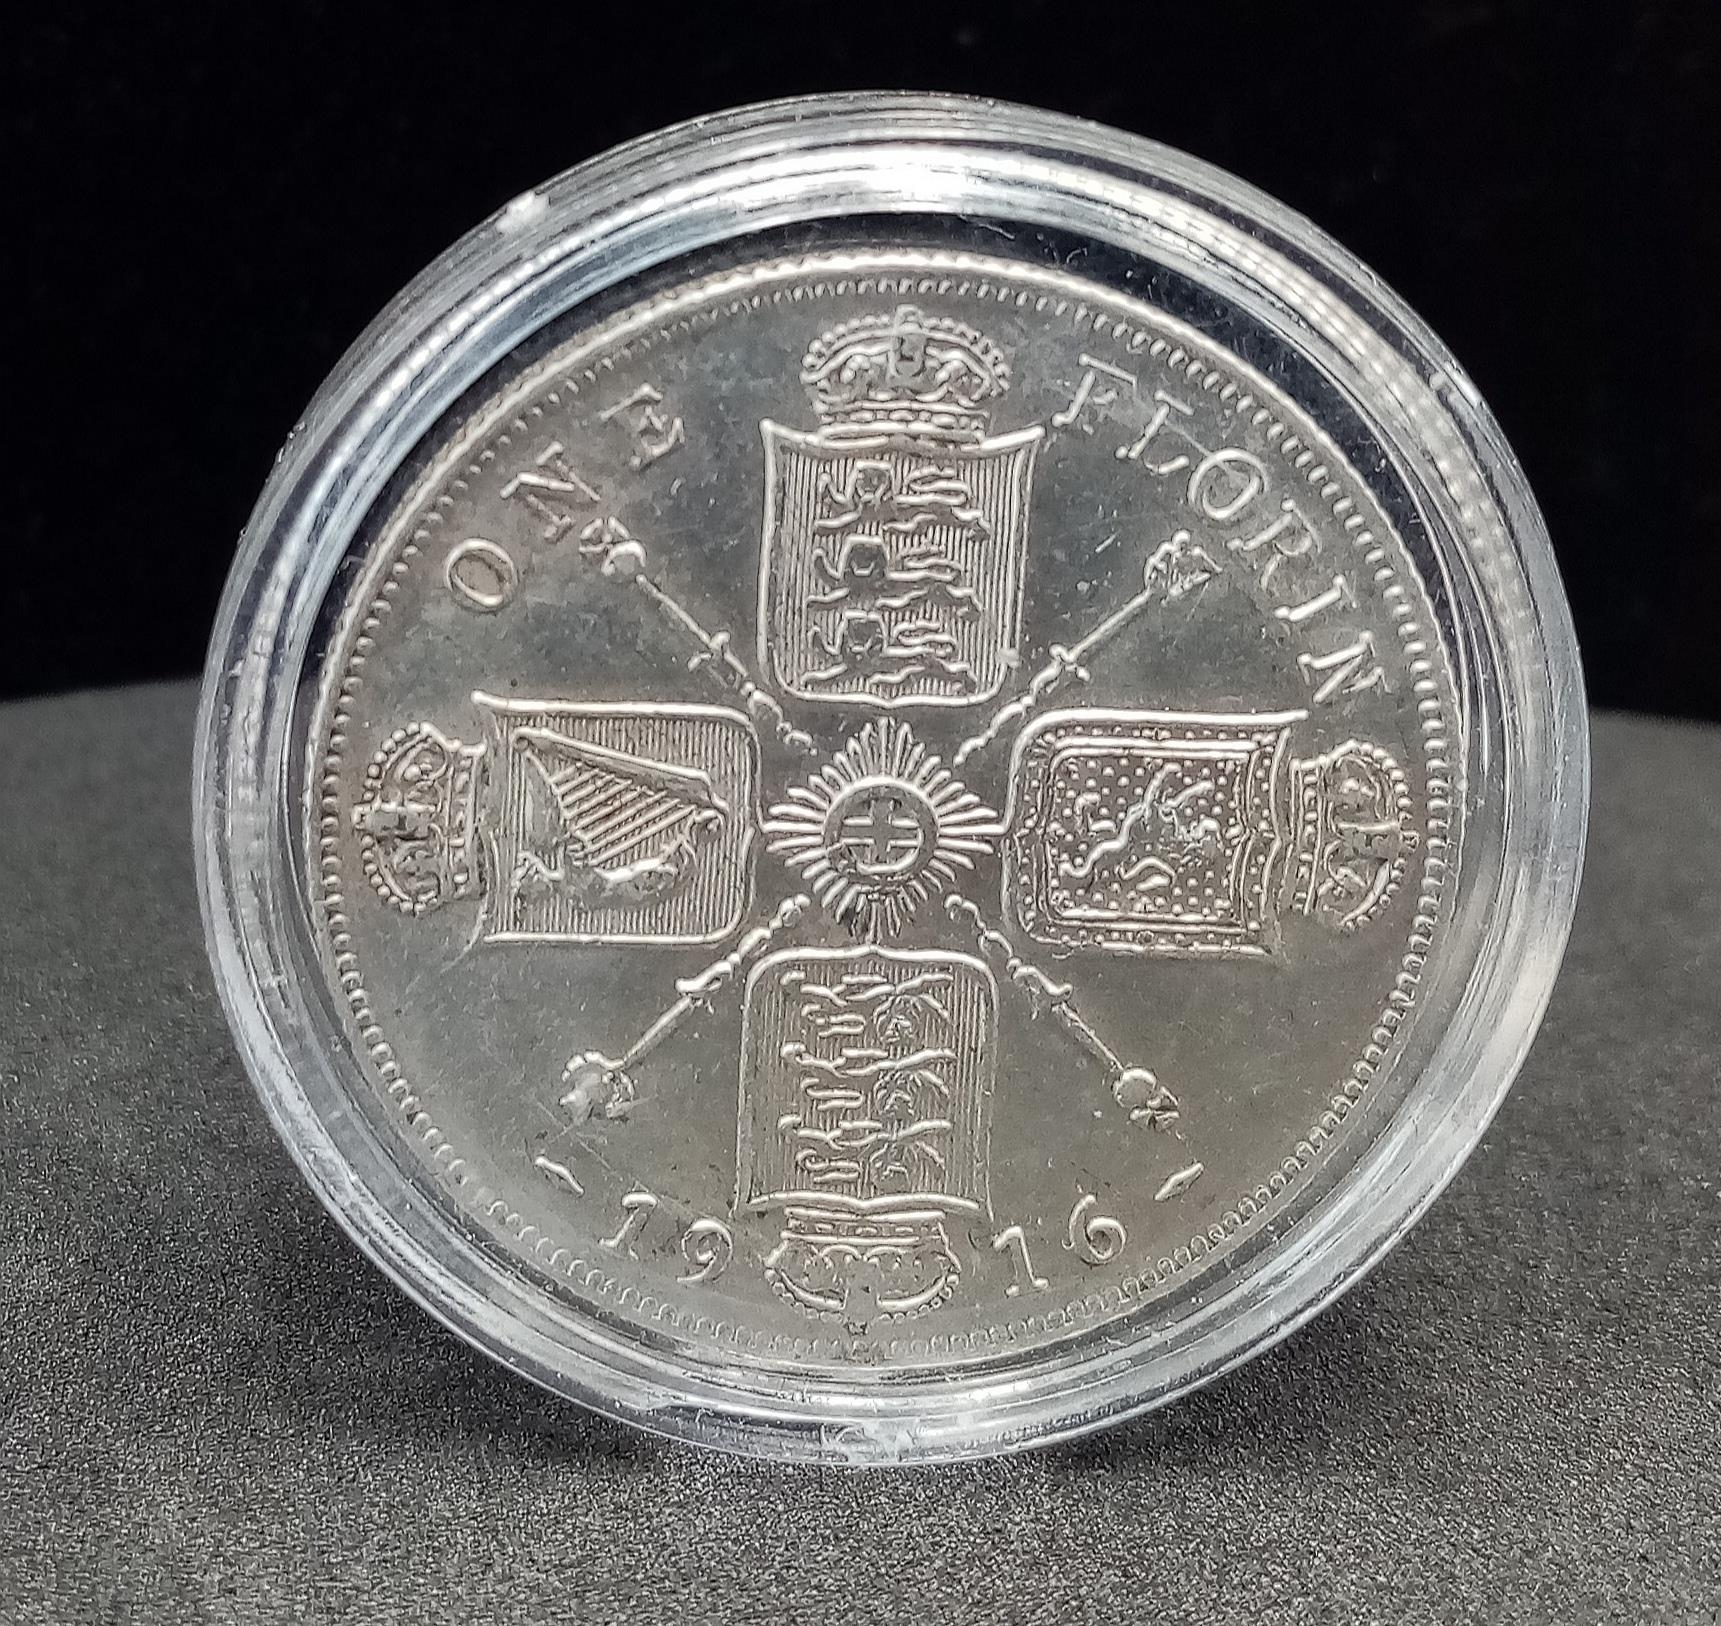 An Uncirculated 1916 Silver George V Coin. - Image 2 of 3